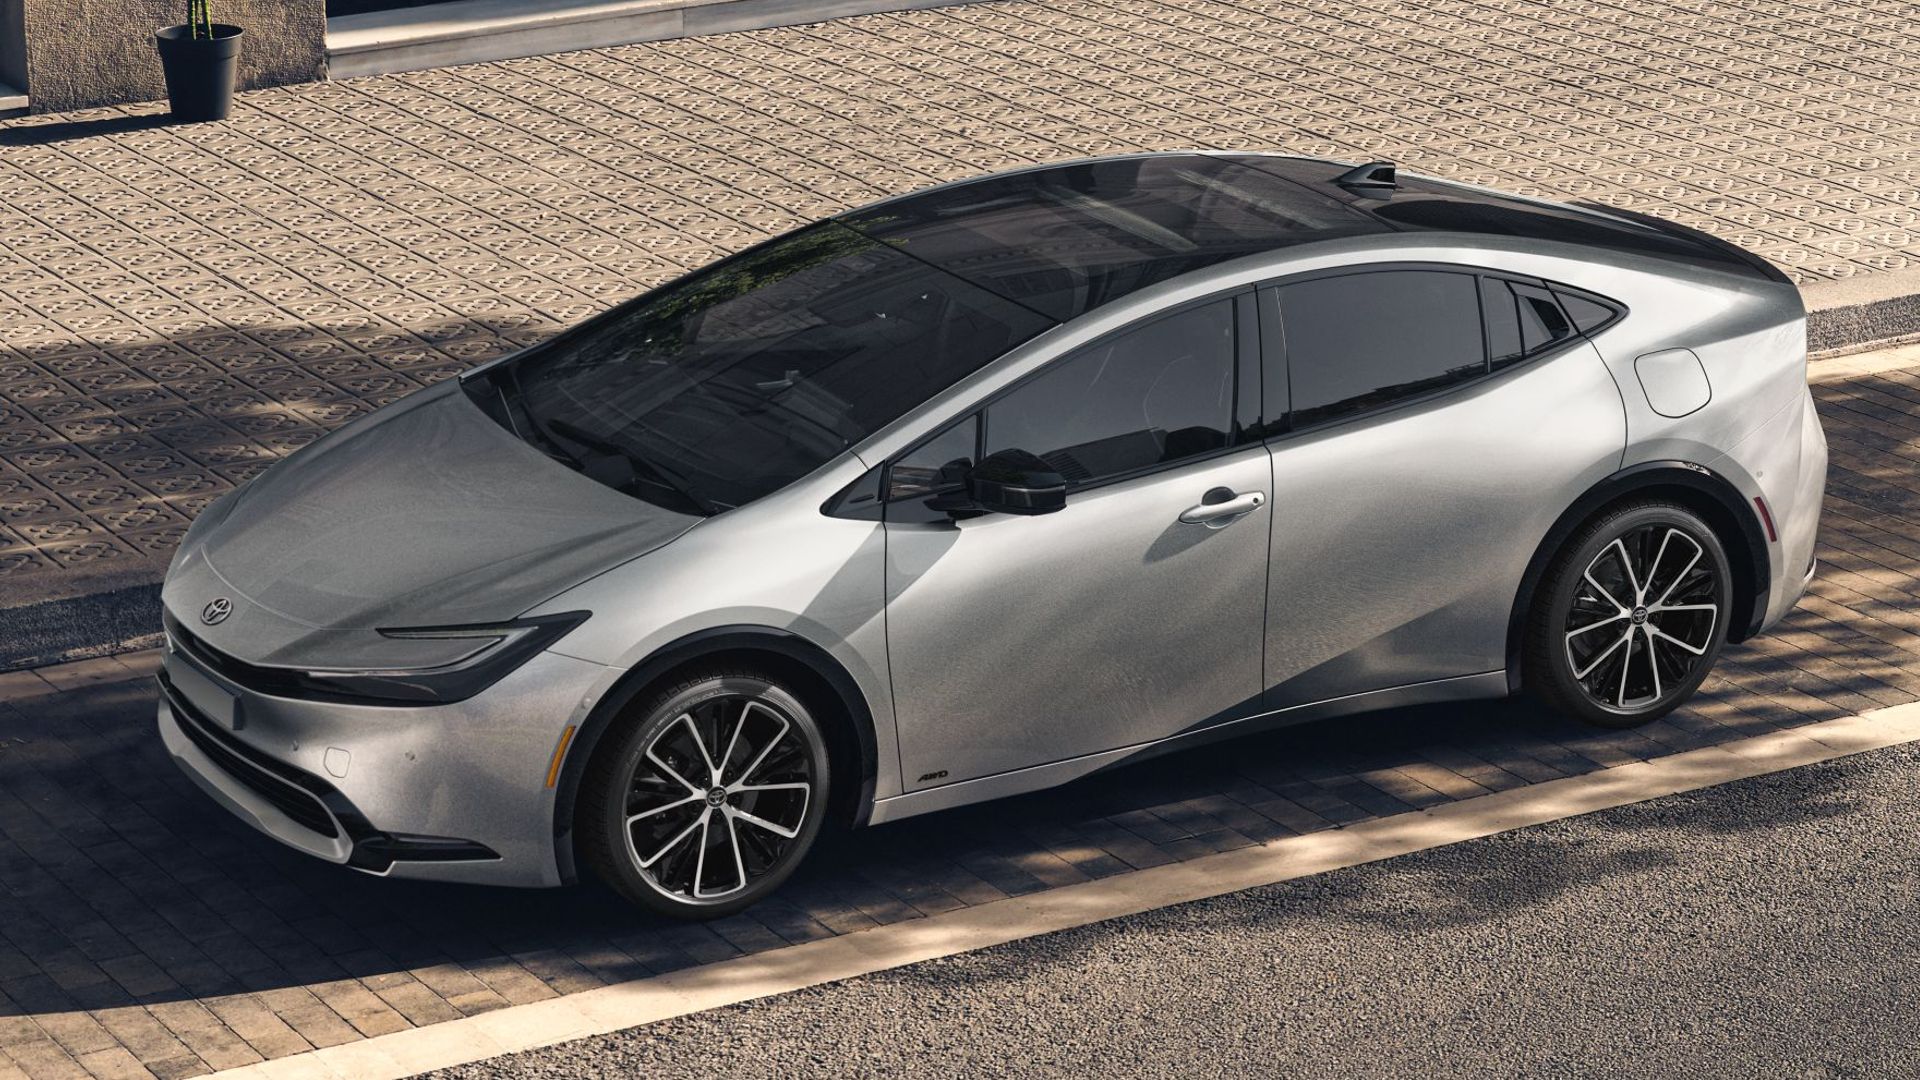 10 reasons why the Toyota Prius is special